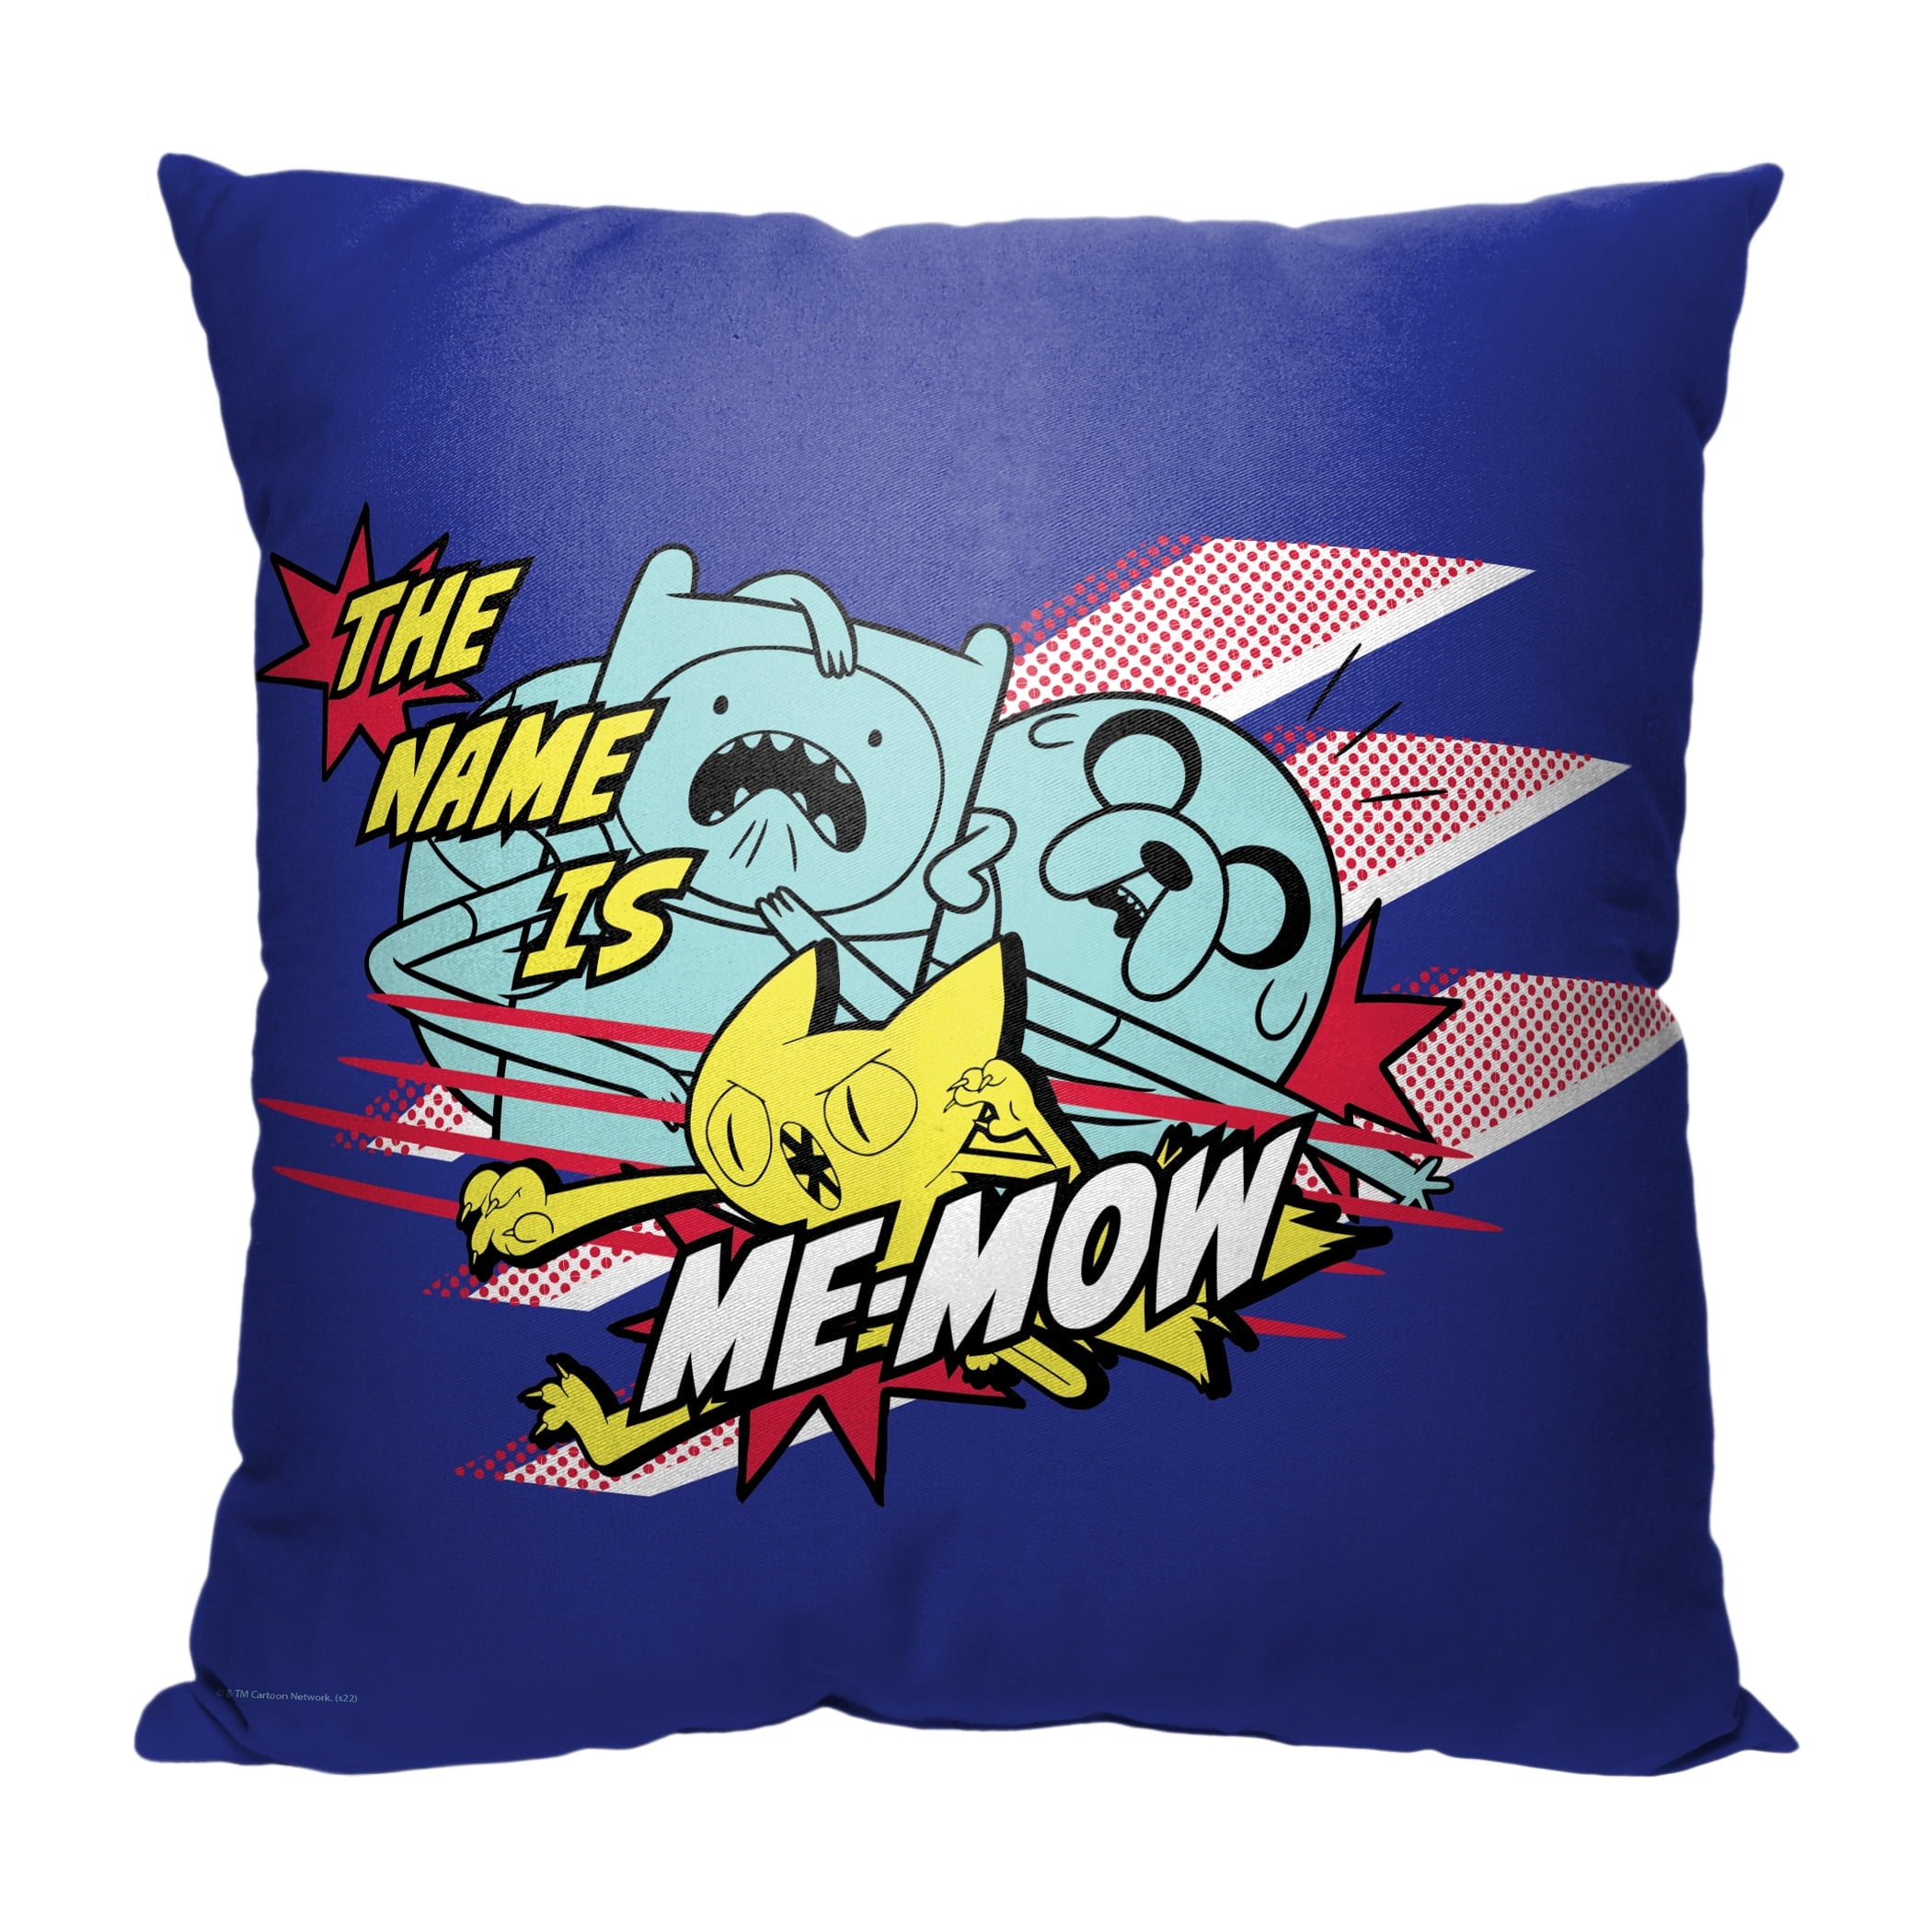 Warner Bros Adventure Time The Names Memeow Kids Printed Throw Pillow, 18 x  18 inches